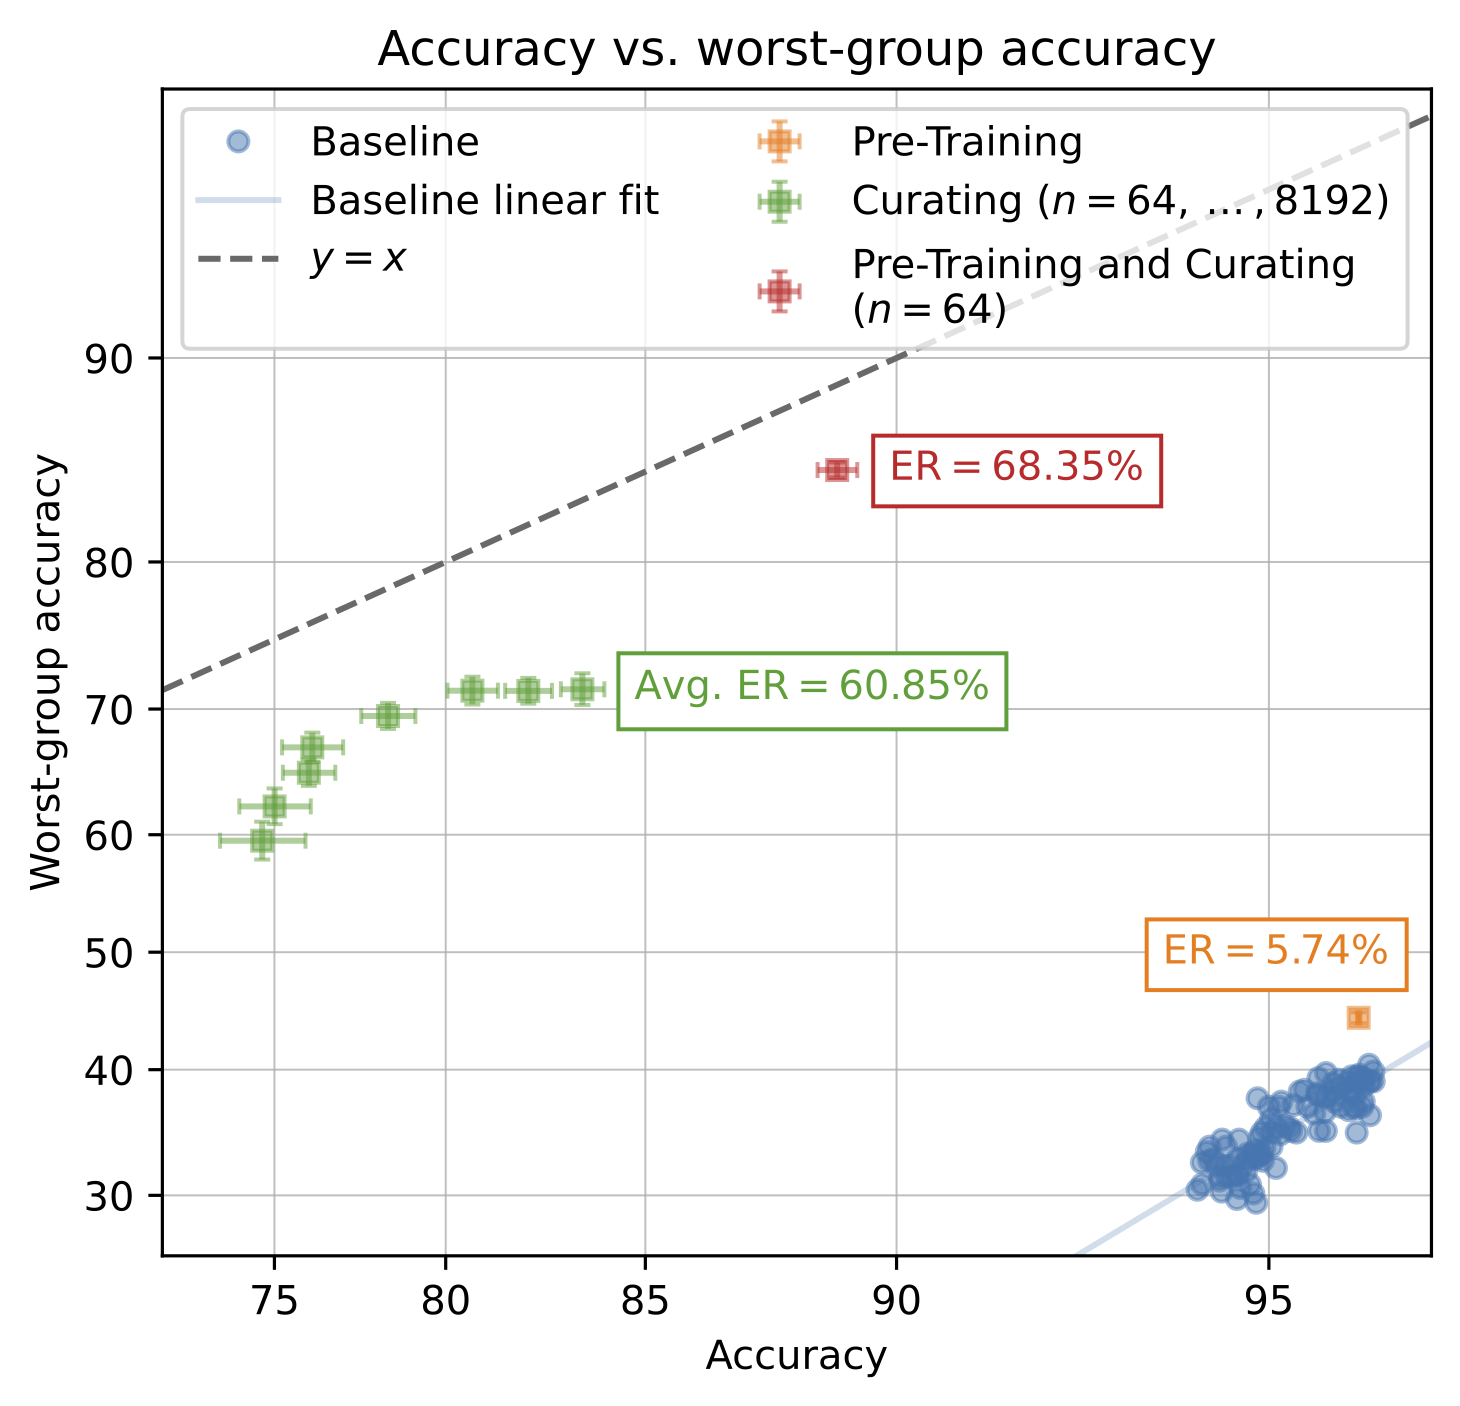 A scatterplot of accuracy vs. worst-group accuracy for models trained from scratch on CelebA, pre-trained models fine-tuned on CelebA, models trained from scratch on our curated dataset, and pre-trained models fine-tuned on our curated dataset